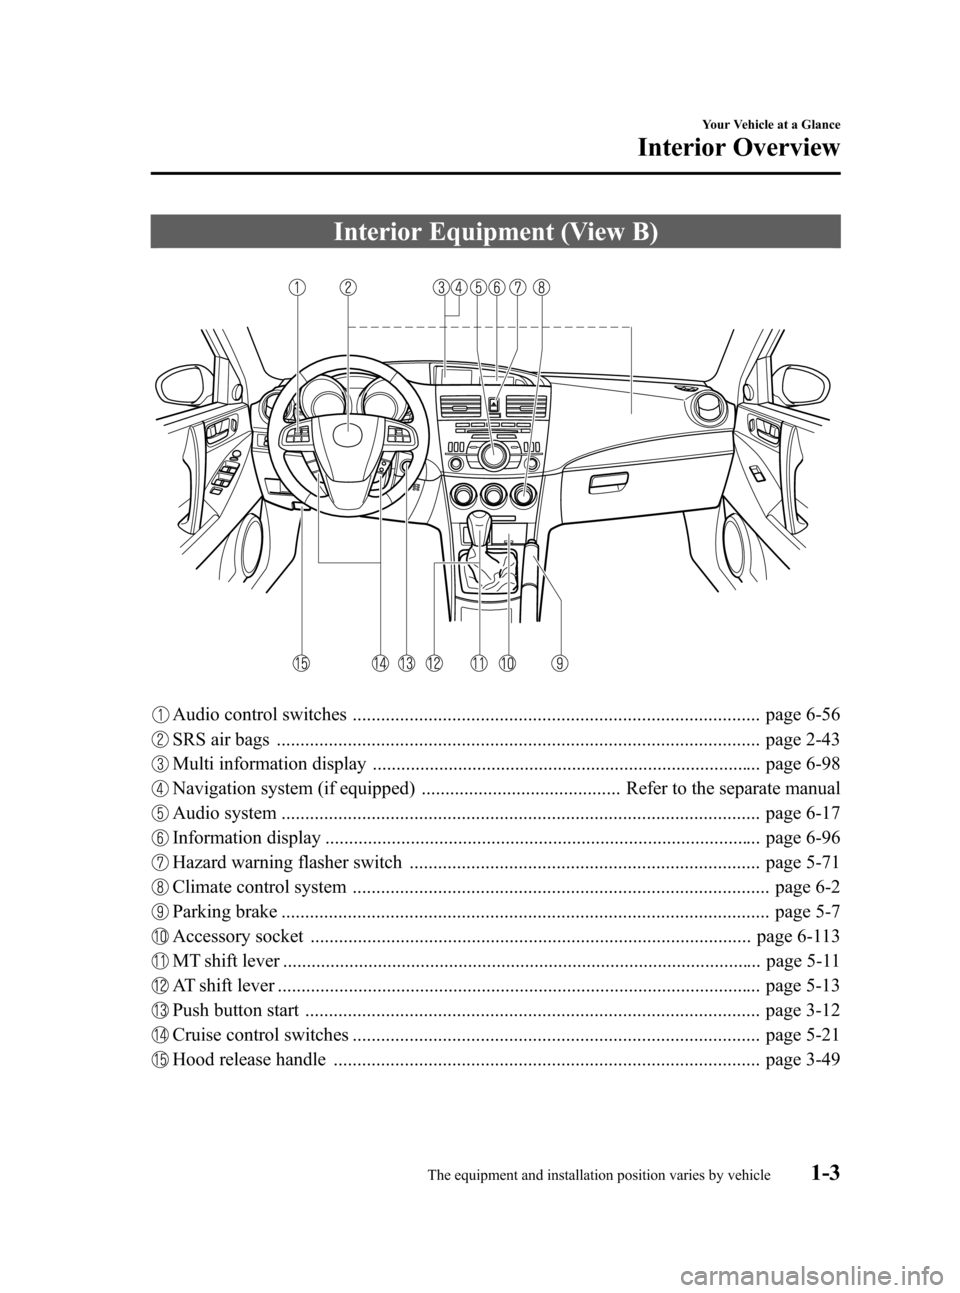 MAZDA MODEL 3 HATCHBACK 2011  Owners Manual (in English) Black plate (9,1)
Interior Equipment (View B)
Audio control switches ...................................................................................... page 6-56
SRS air bags .....................